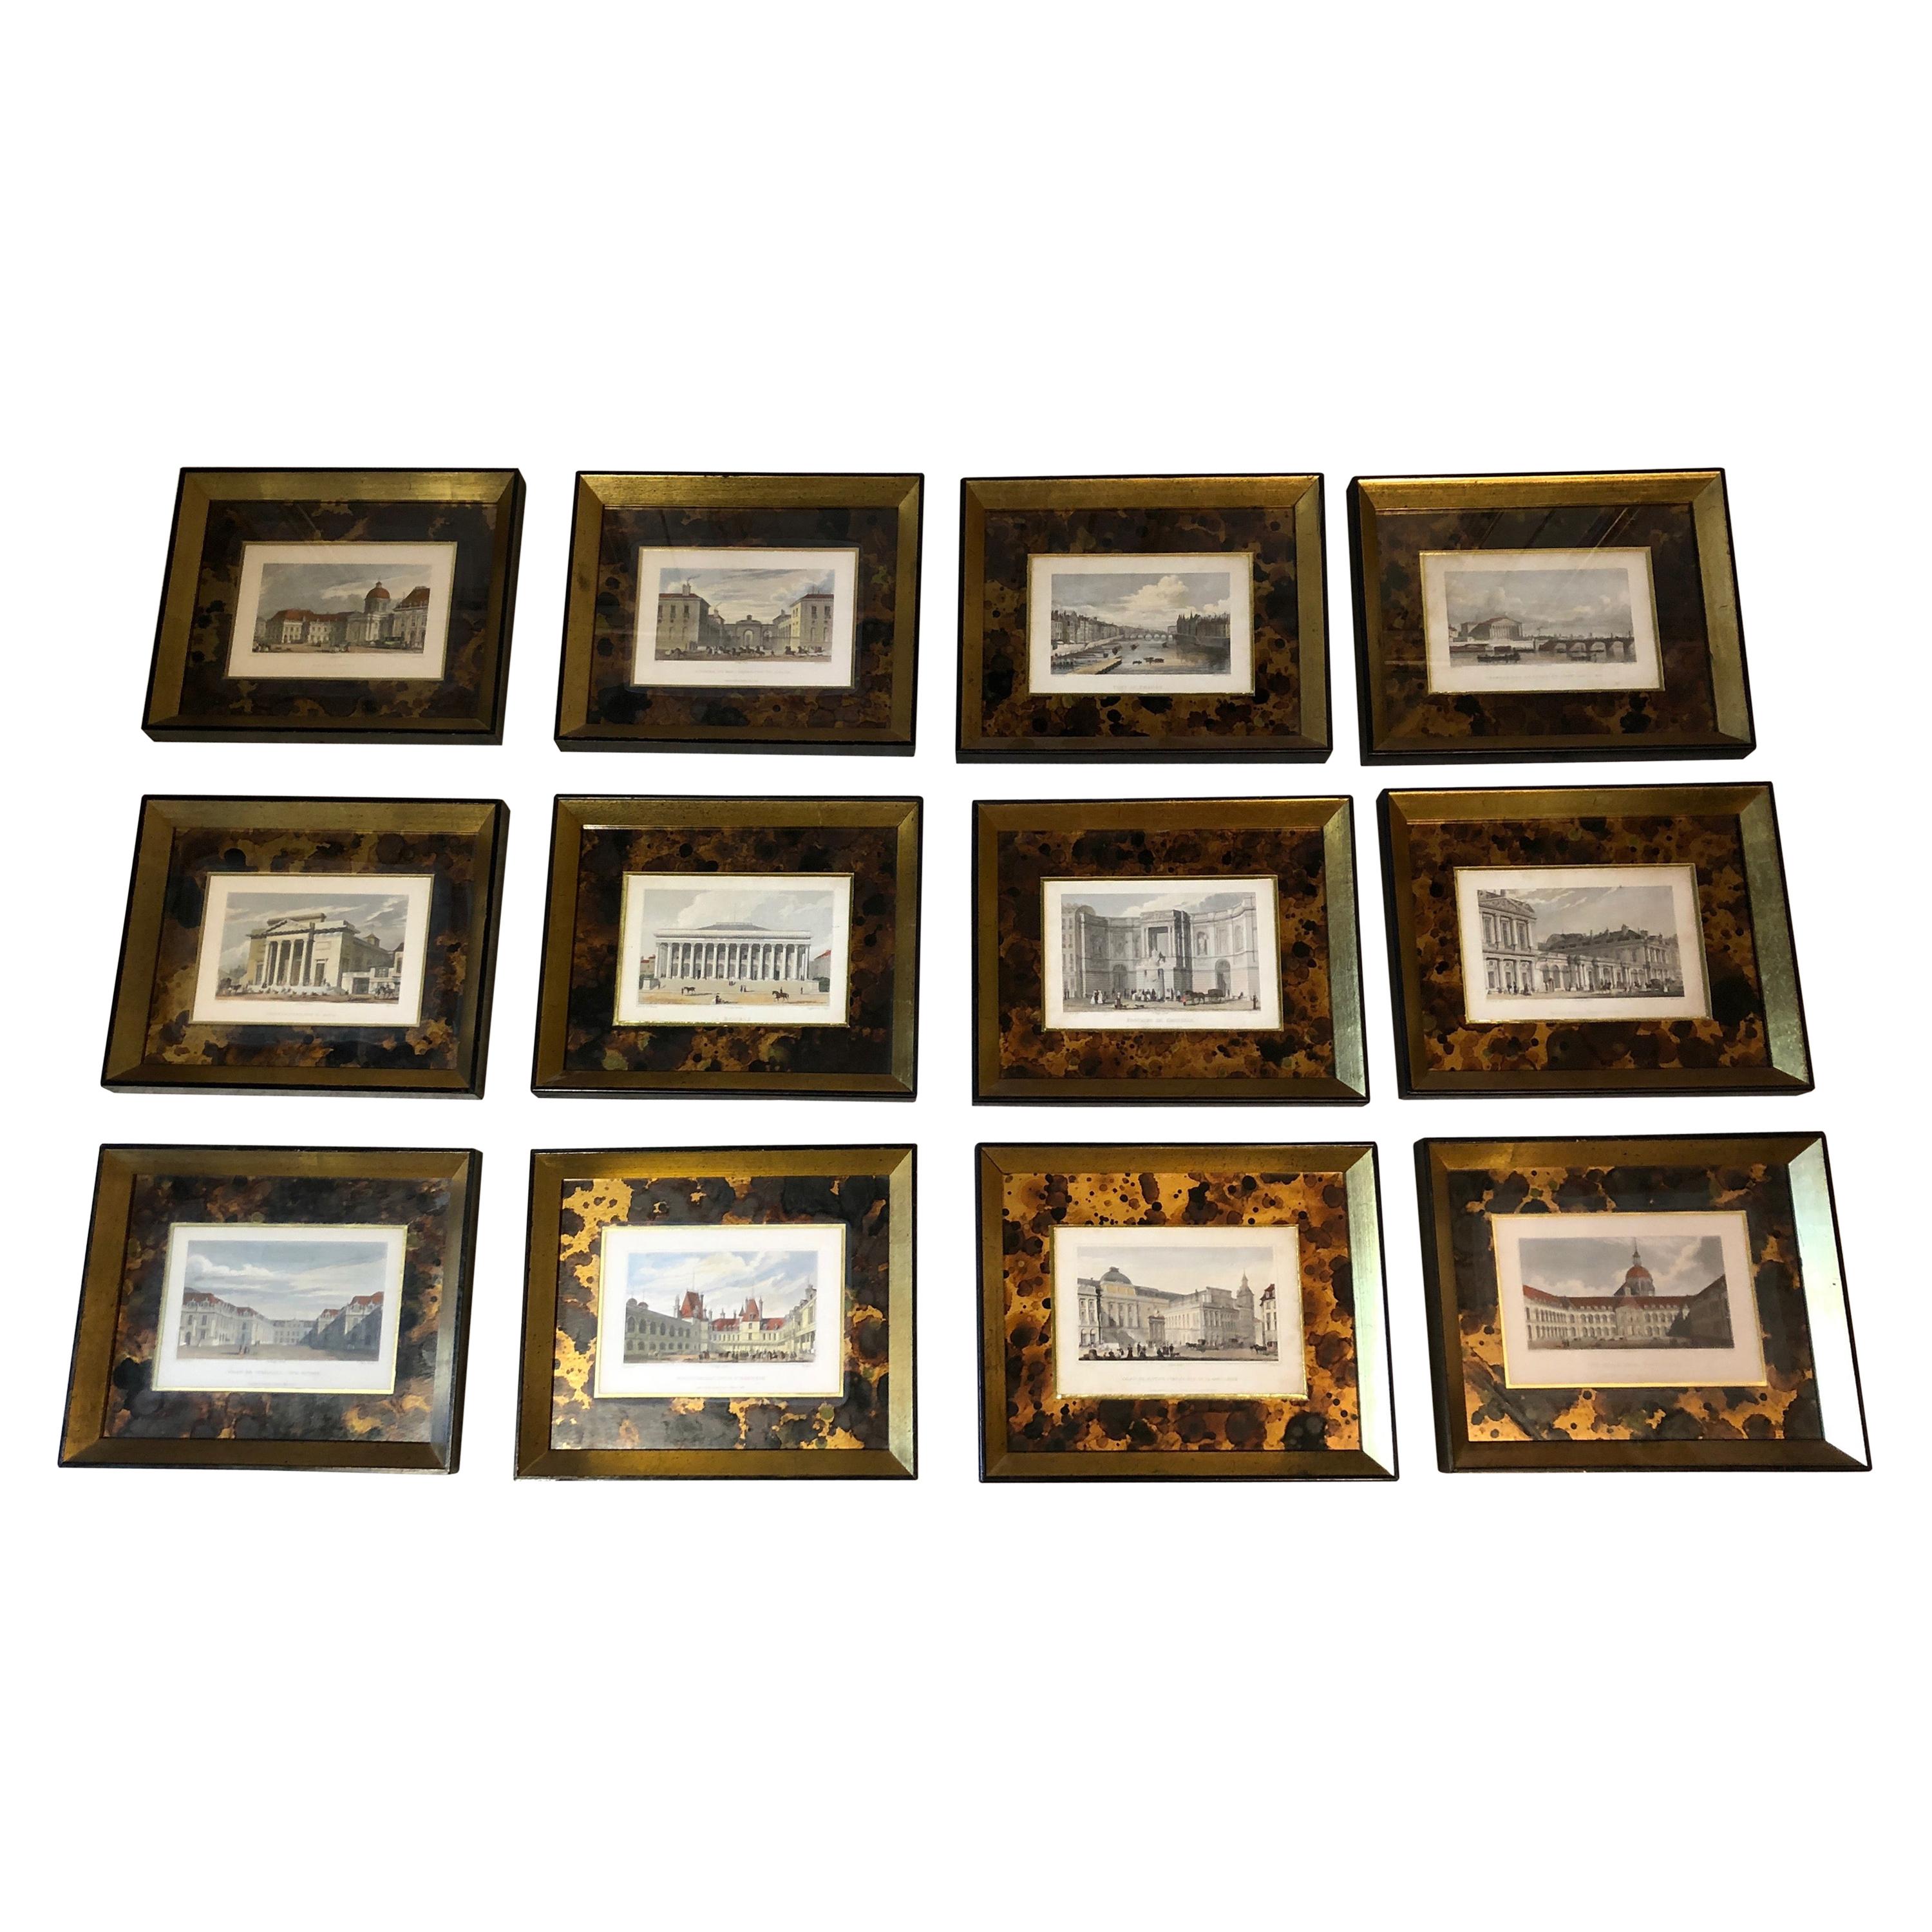 Impressive Collection of 12 Antique Framed and Hand Colored Bookplate Engravings